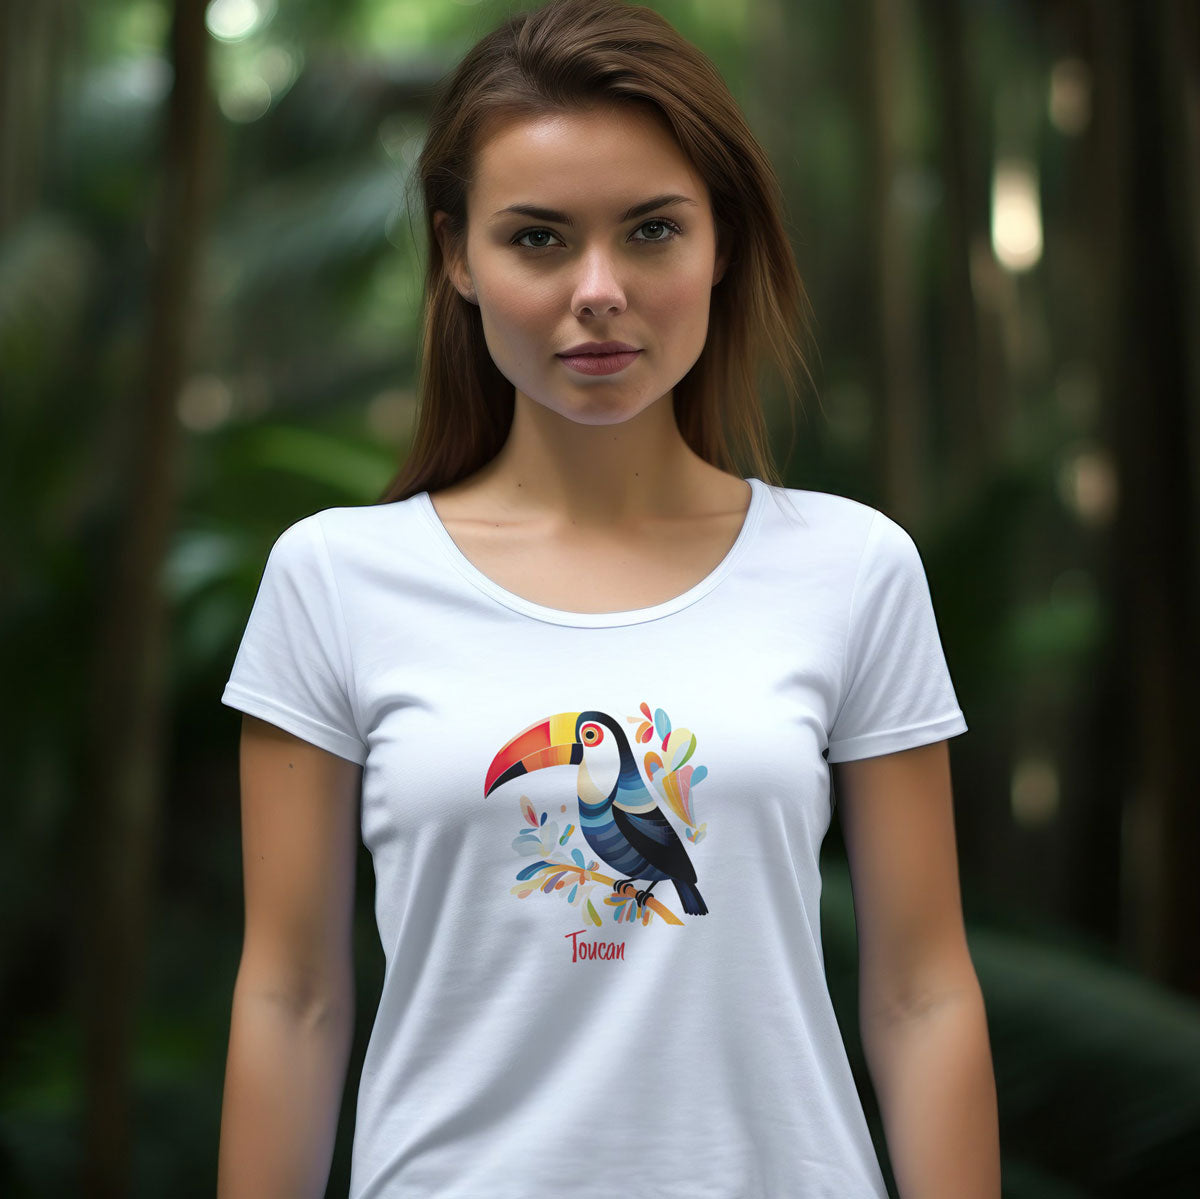 woman wearing a white t-shirt with a toucan print